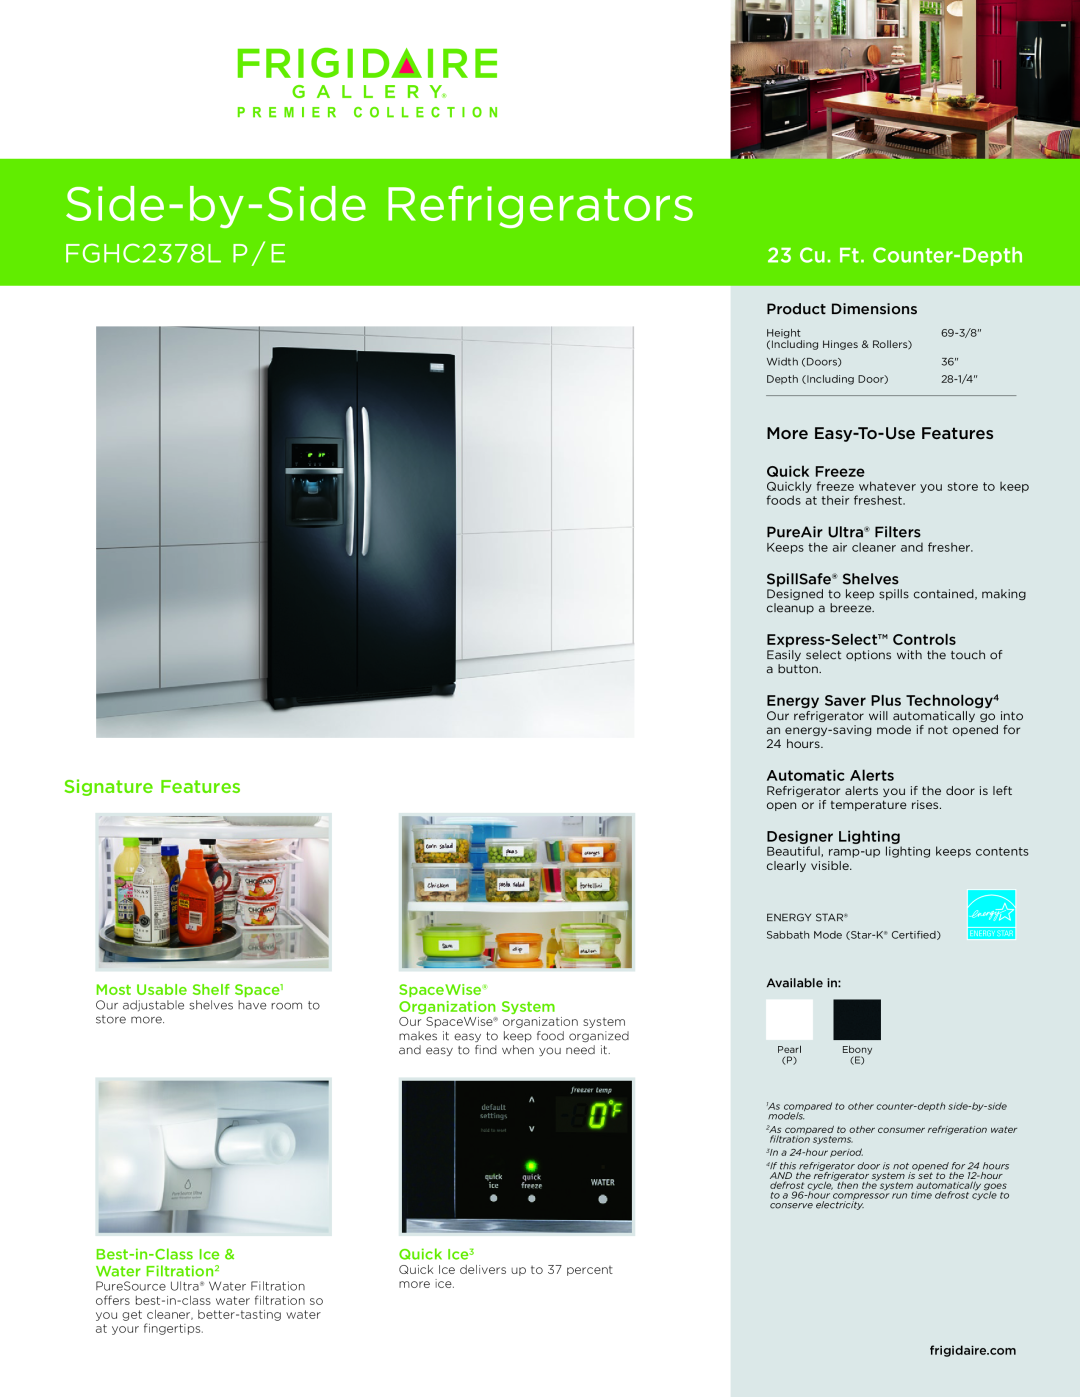 Frigidaire dimensions Side-by-SideRefrigerators, FGHC2378L P / E, 23 Cu. Ft. Counter-Depth, Signature Features 